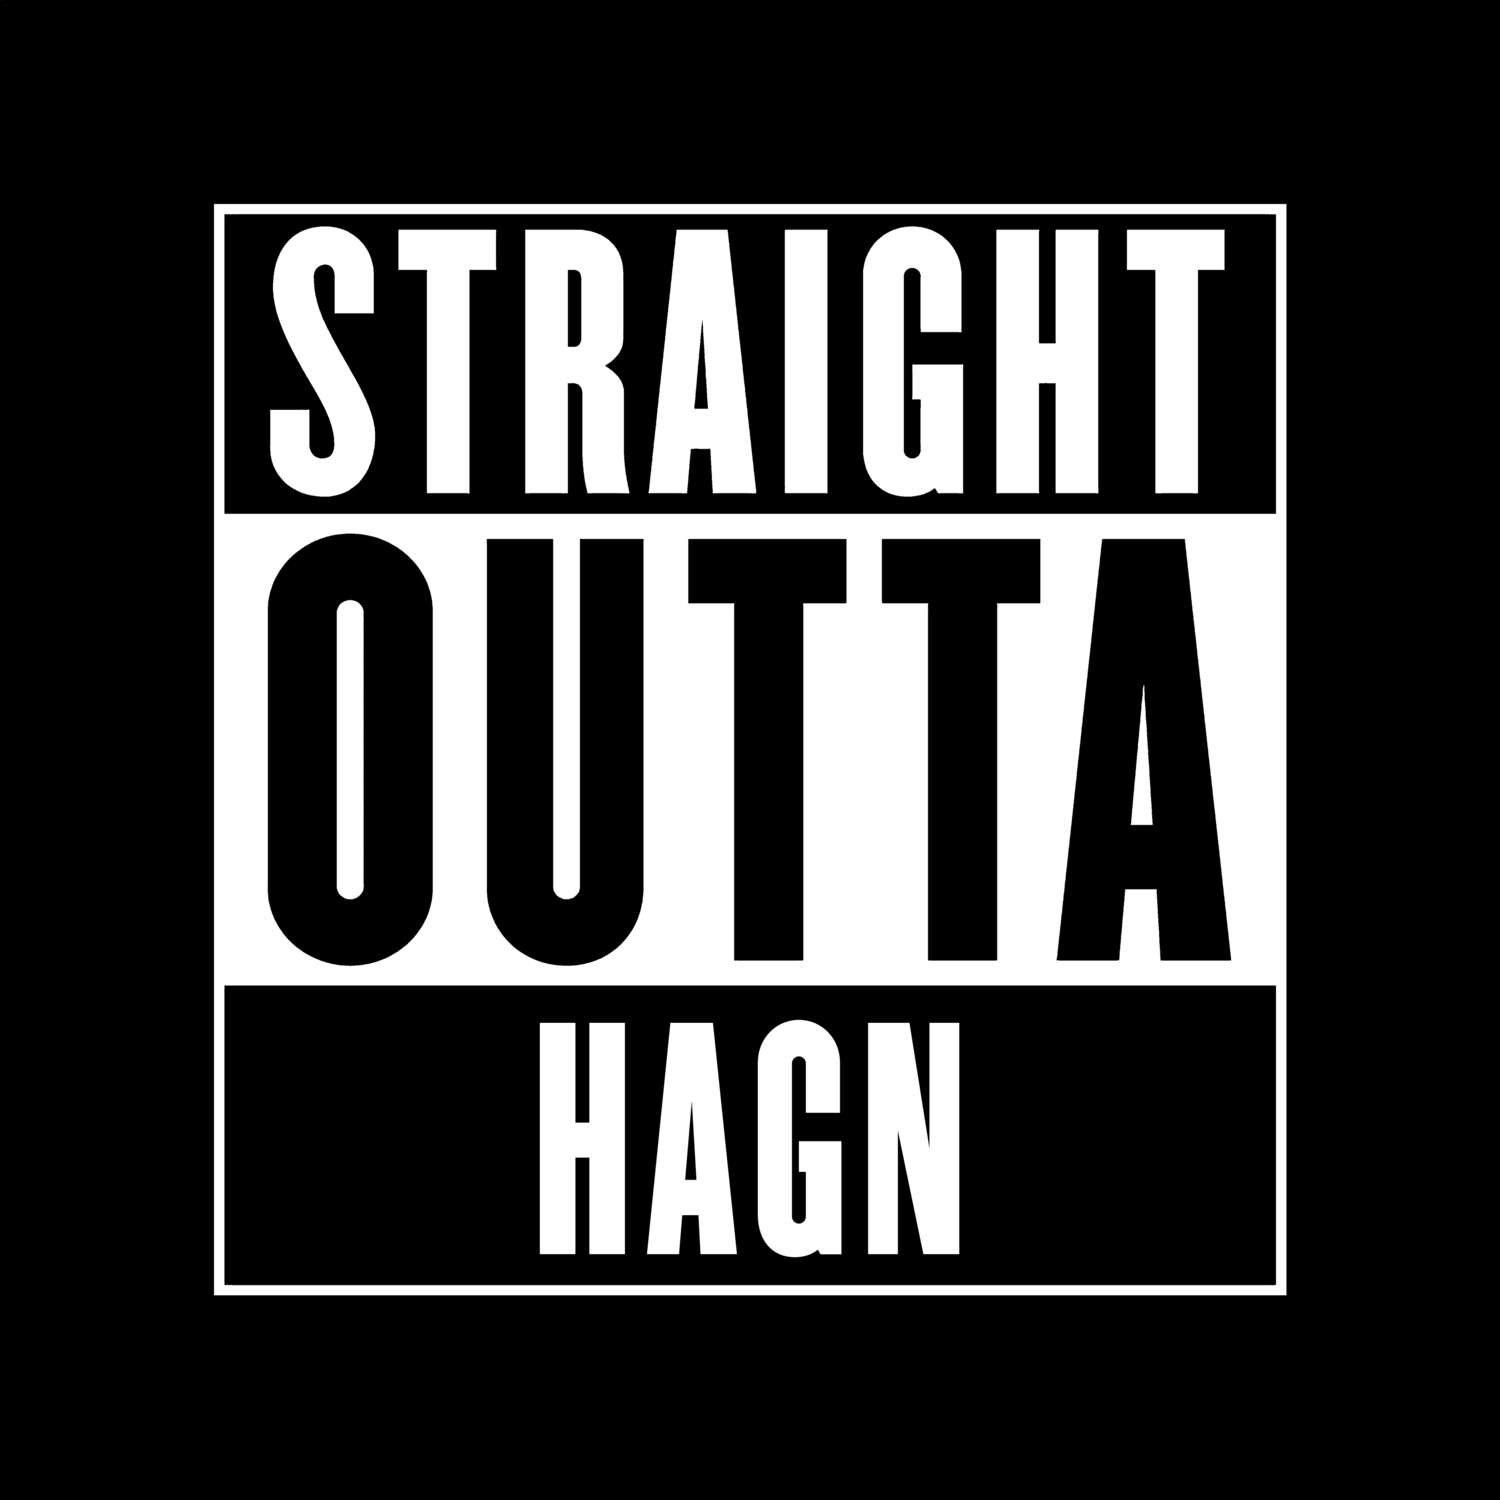 Hagn T-Shirt »Straight Outta«